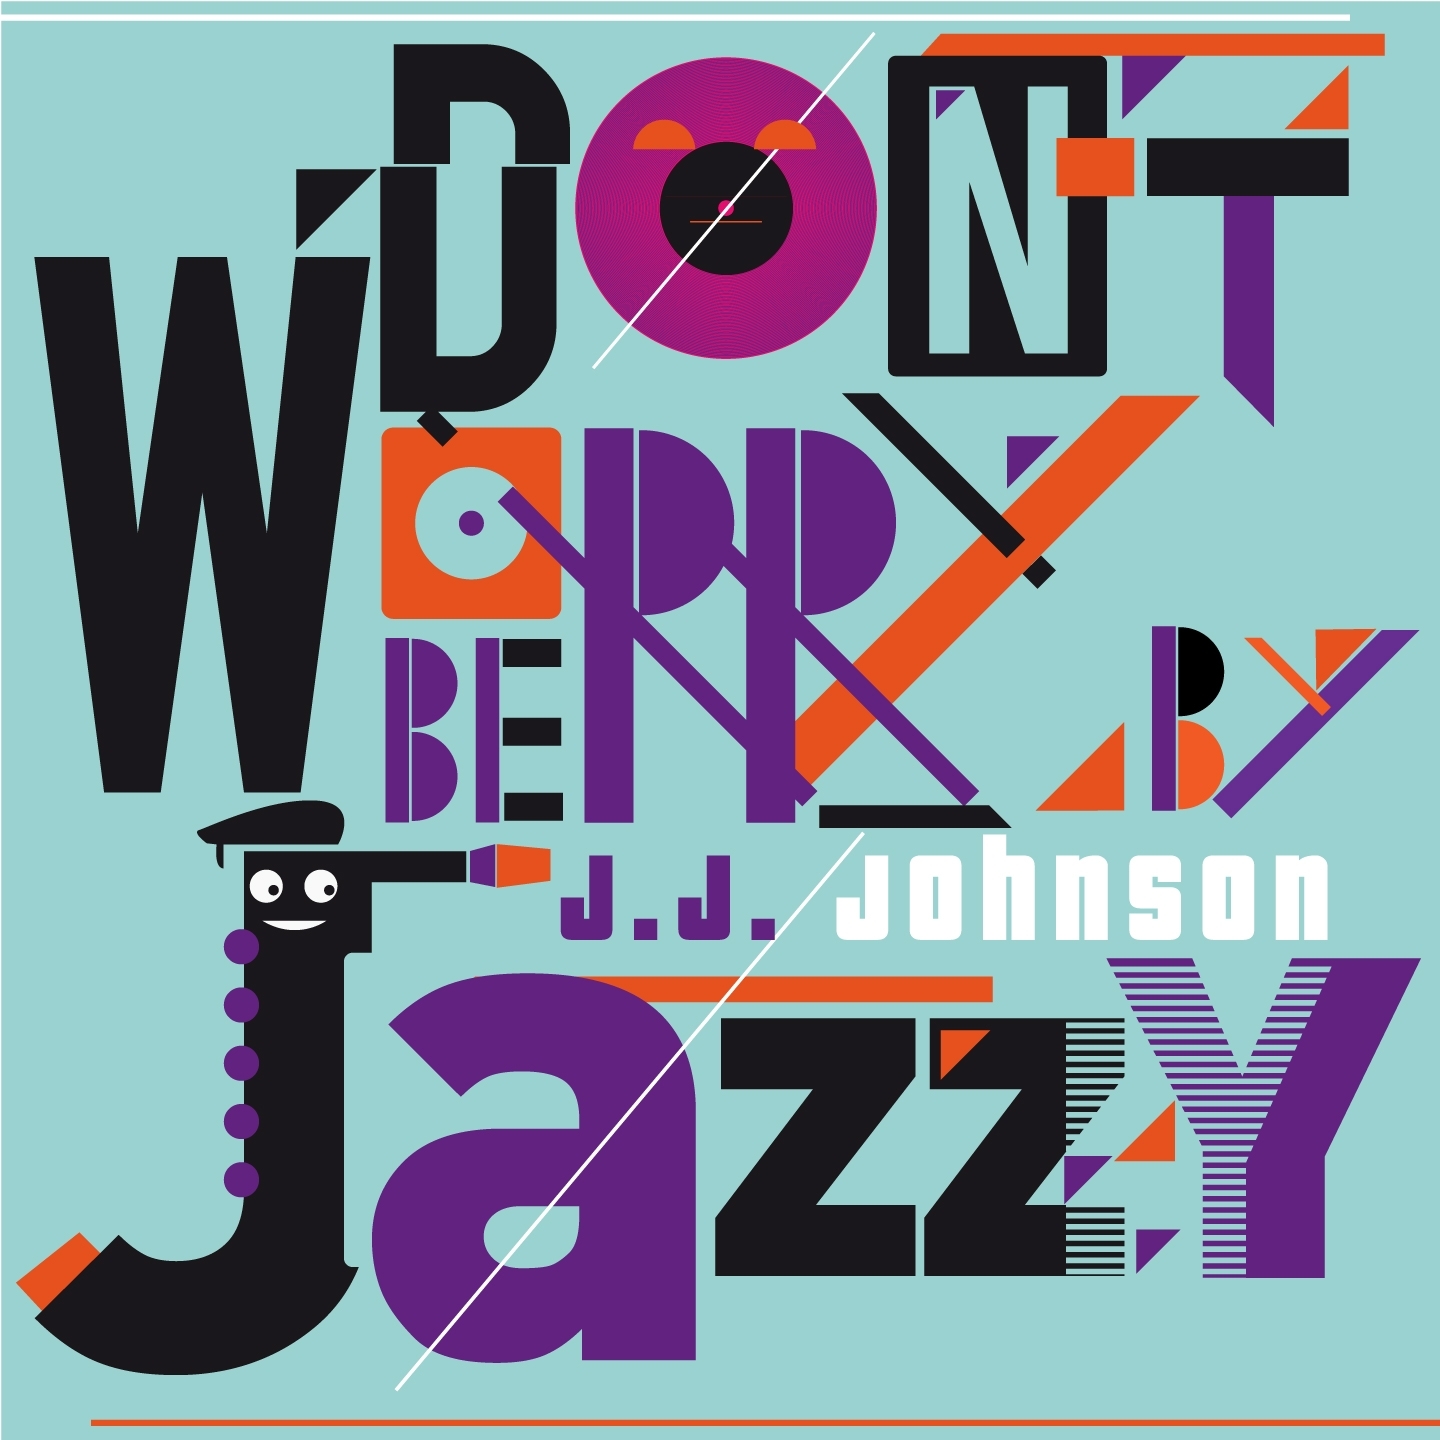 Don't Worry Be Jazzy by J.J. Johnson